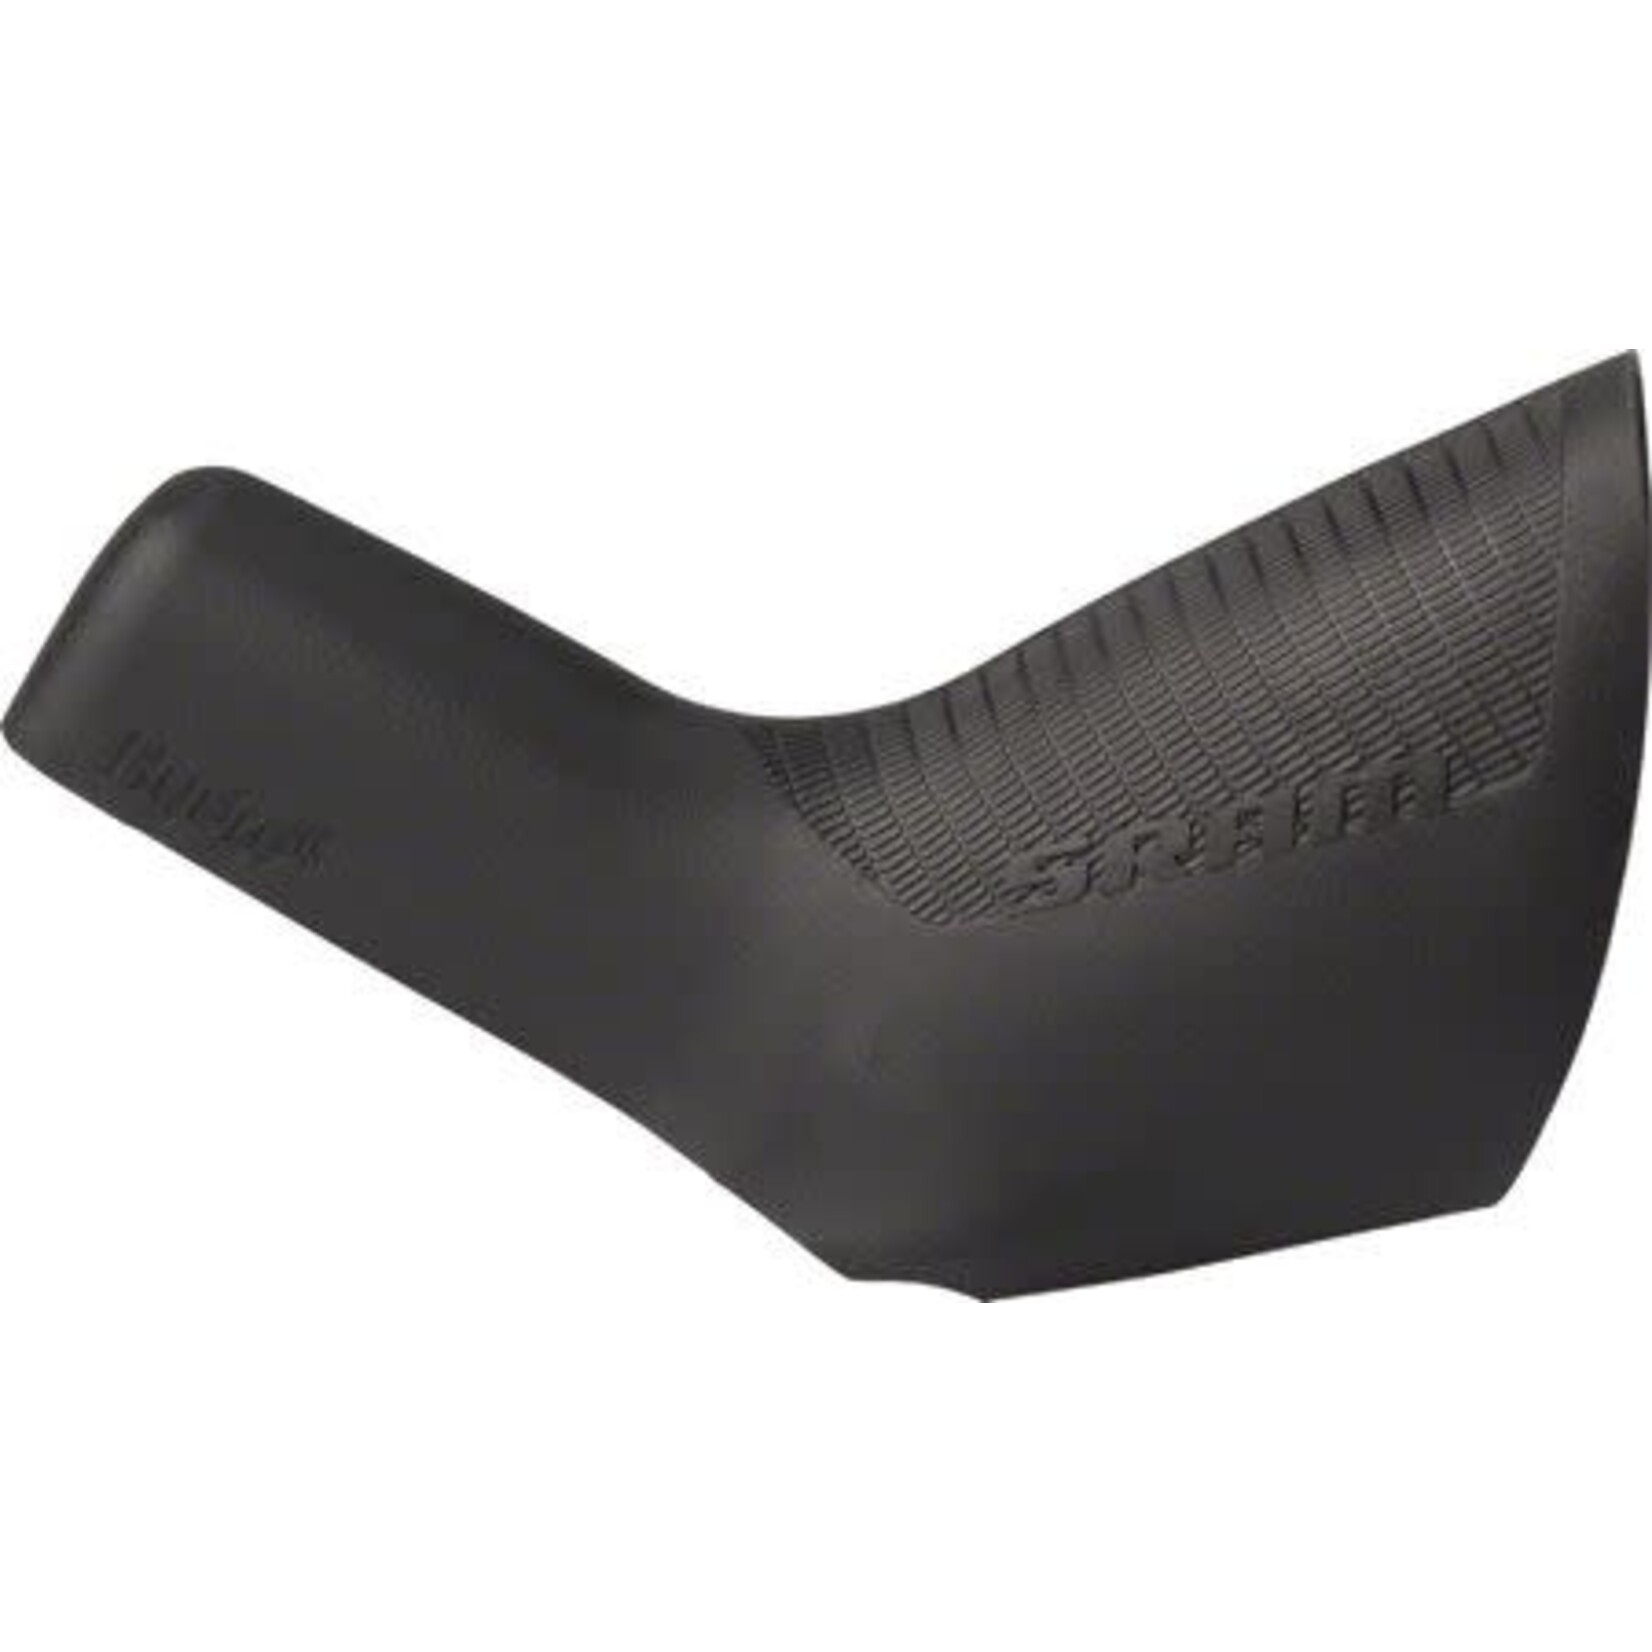 Sram SRAM Red, Force, Rival, S700 Hydraulic Brake Lever Hood Covers, Black, Pair